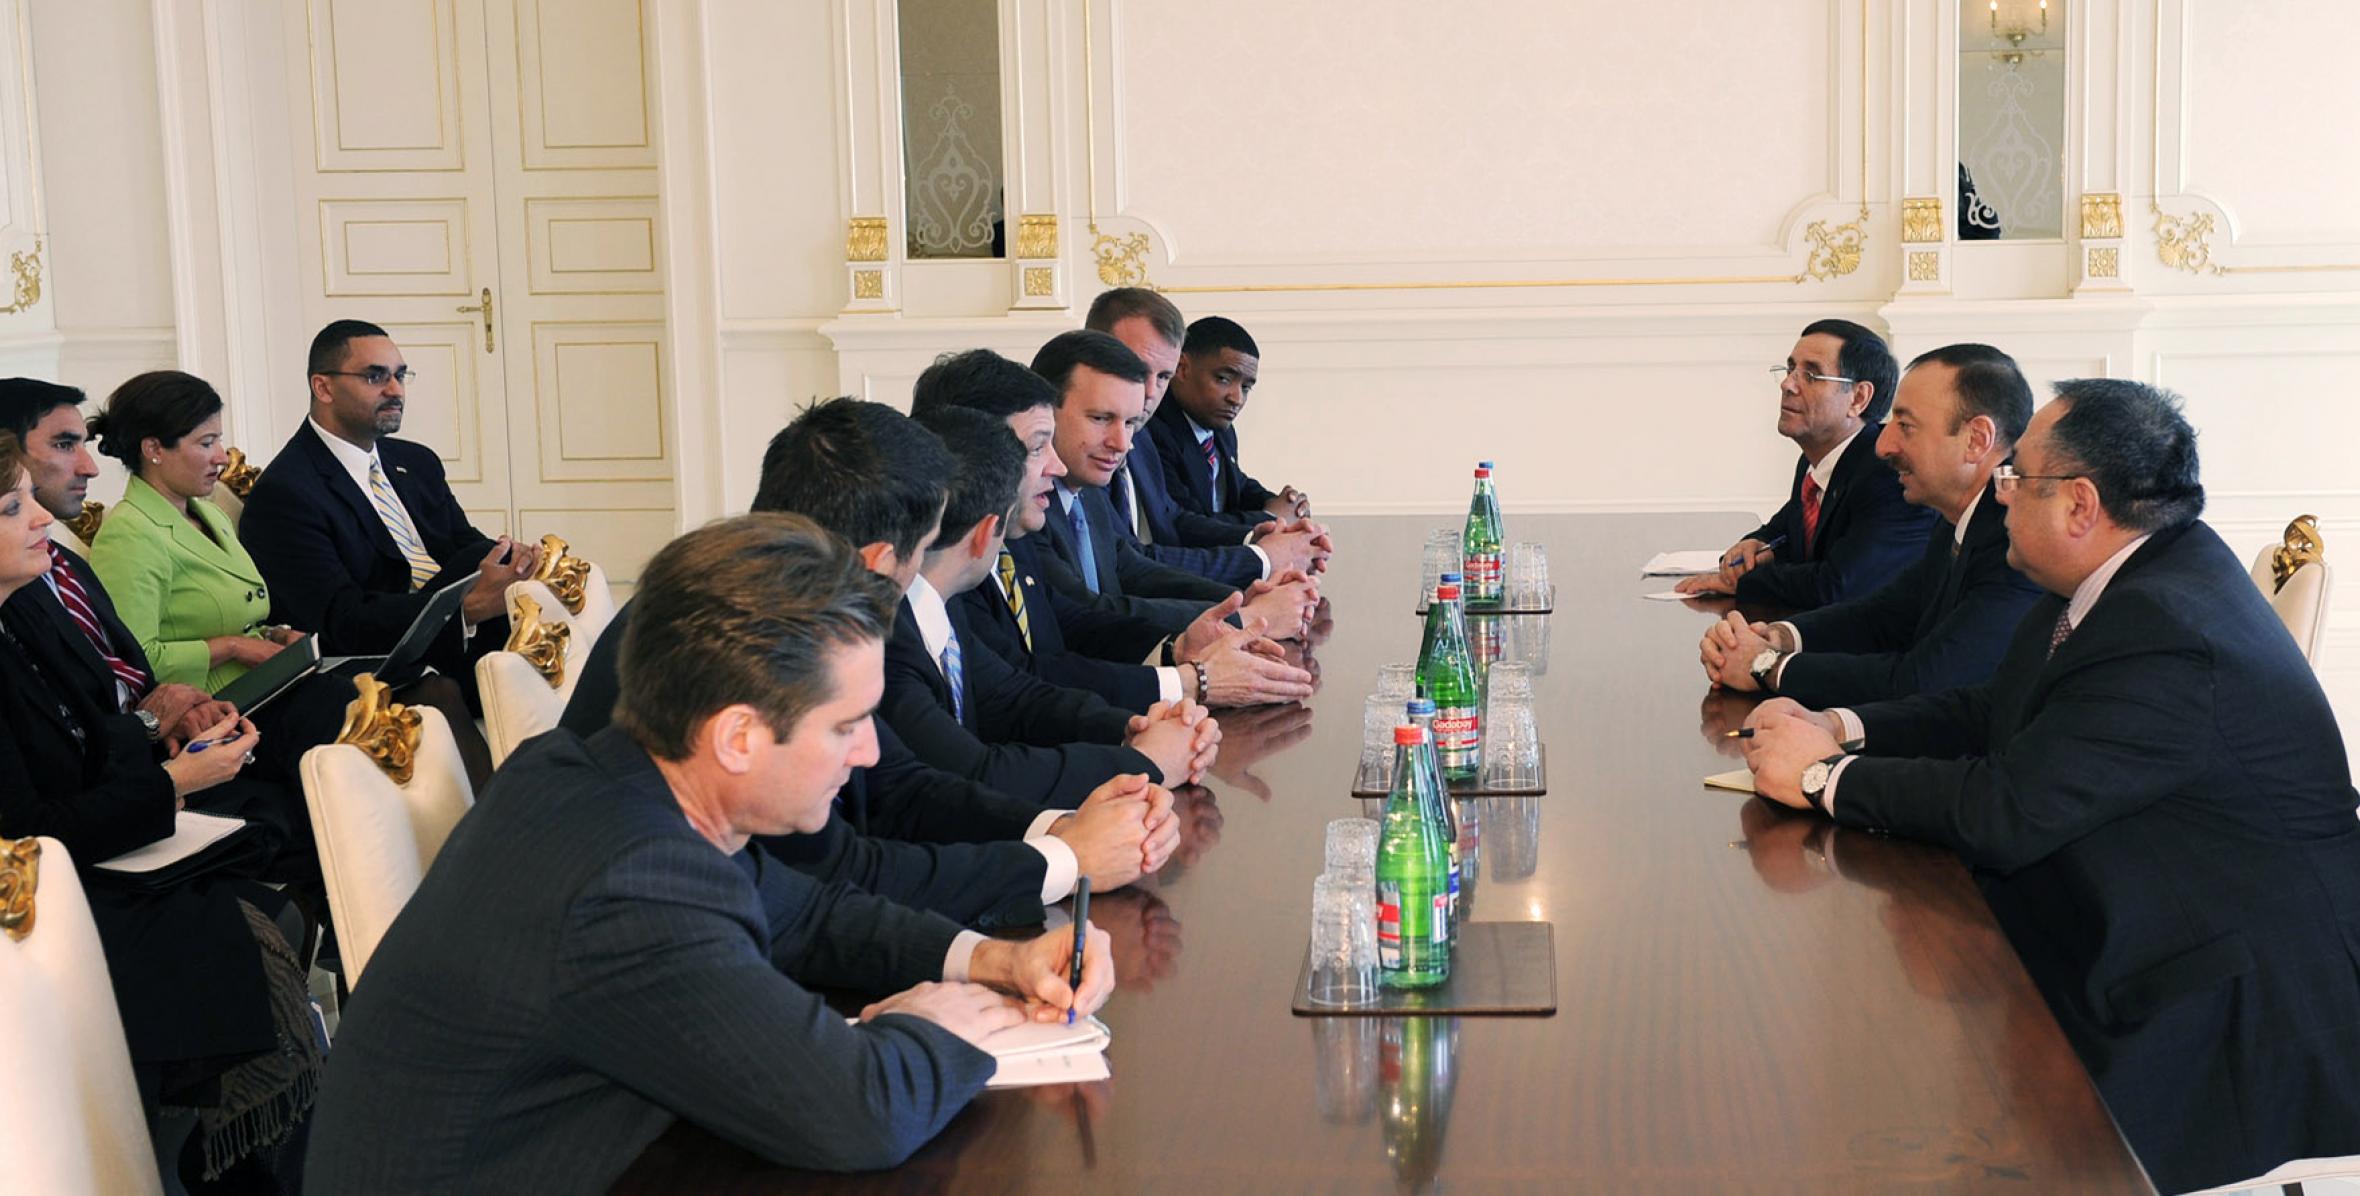 Ilham Aliyev received a delegation led by Co-chairman of the US House of Representative’s working group on Azerbaijan, Bill Shuster